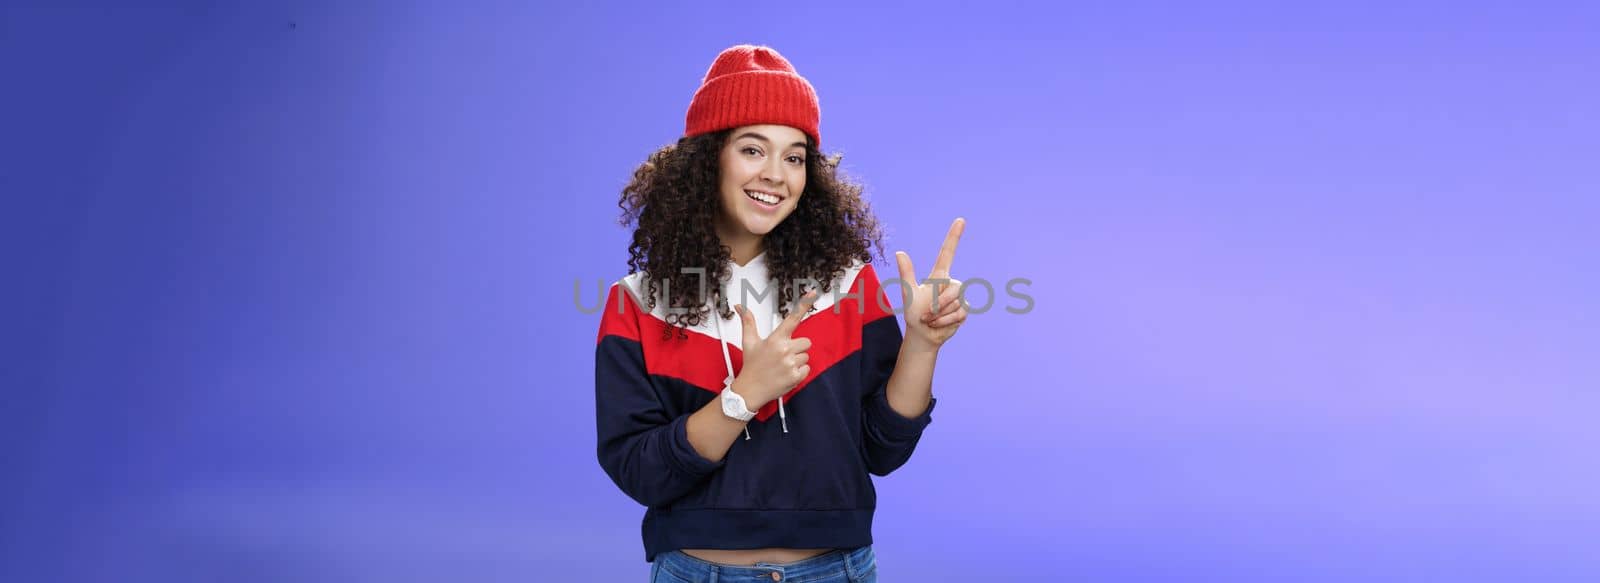 Portrait of friendly good-looking woman with curly hair in red warm beanie pointing at upper left corner and smiling delighted as promoting cool copy space against blue background by Benzoix